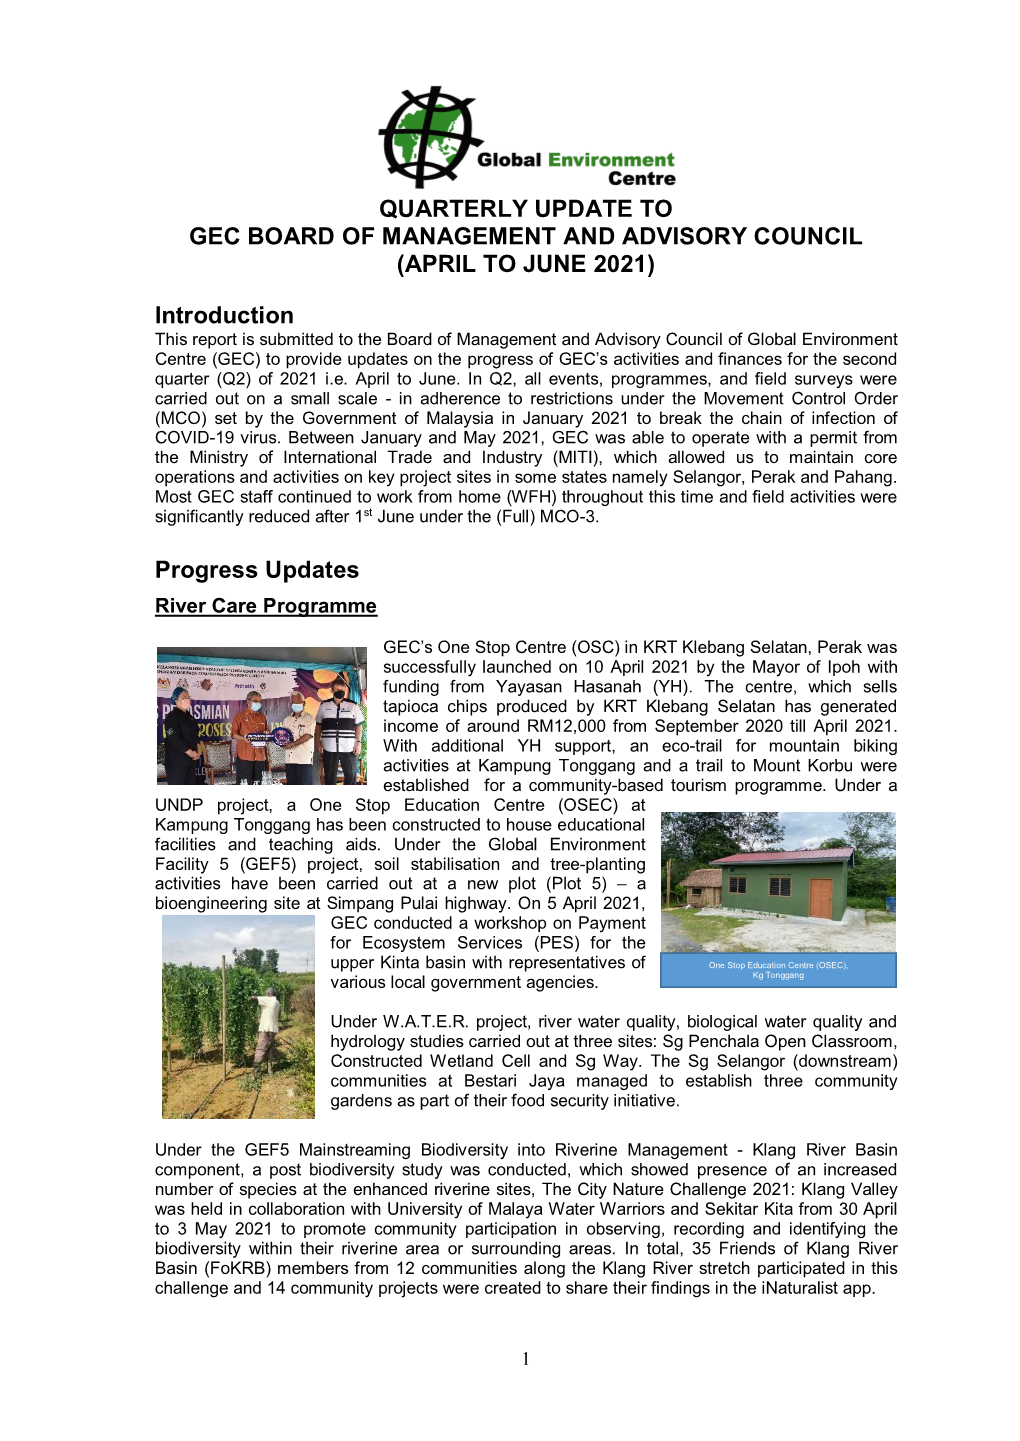 Quarterly Update to Gec Board of Management and Advisory Council (April to June 2021)